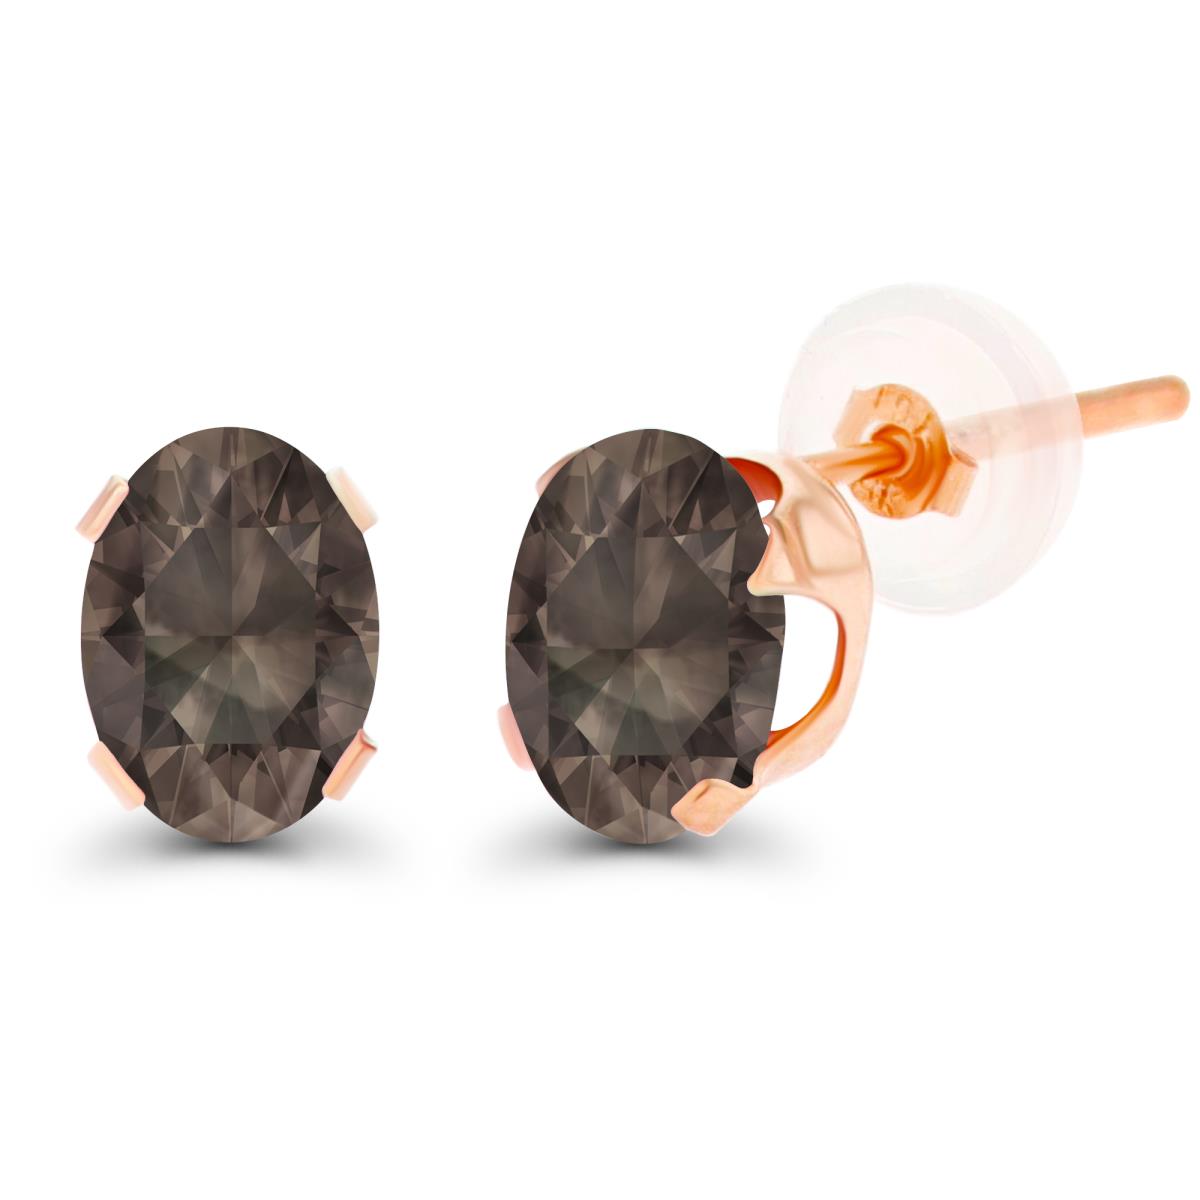 10K Rose Gold 7x5mm Oval Smokey Quartz Stud Earring with Silicone Back